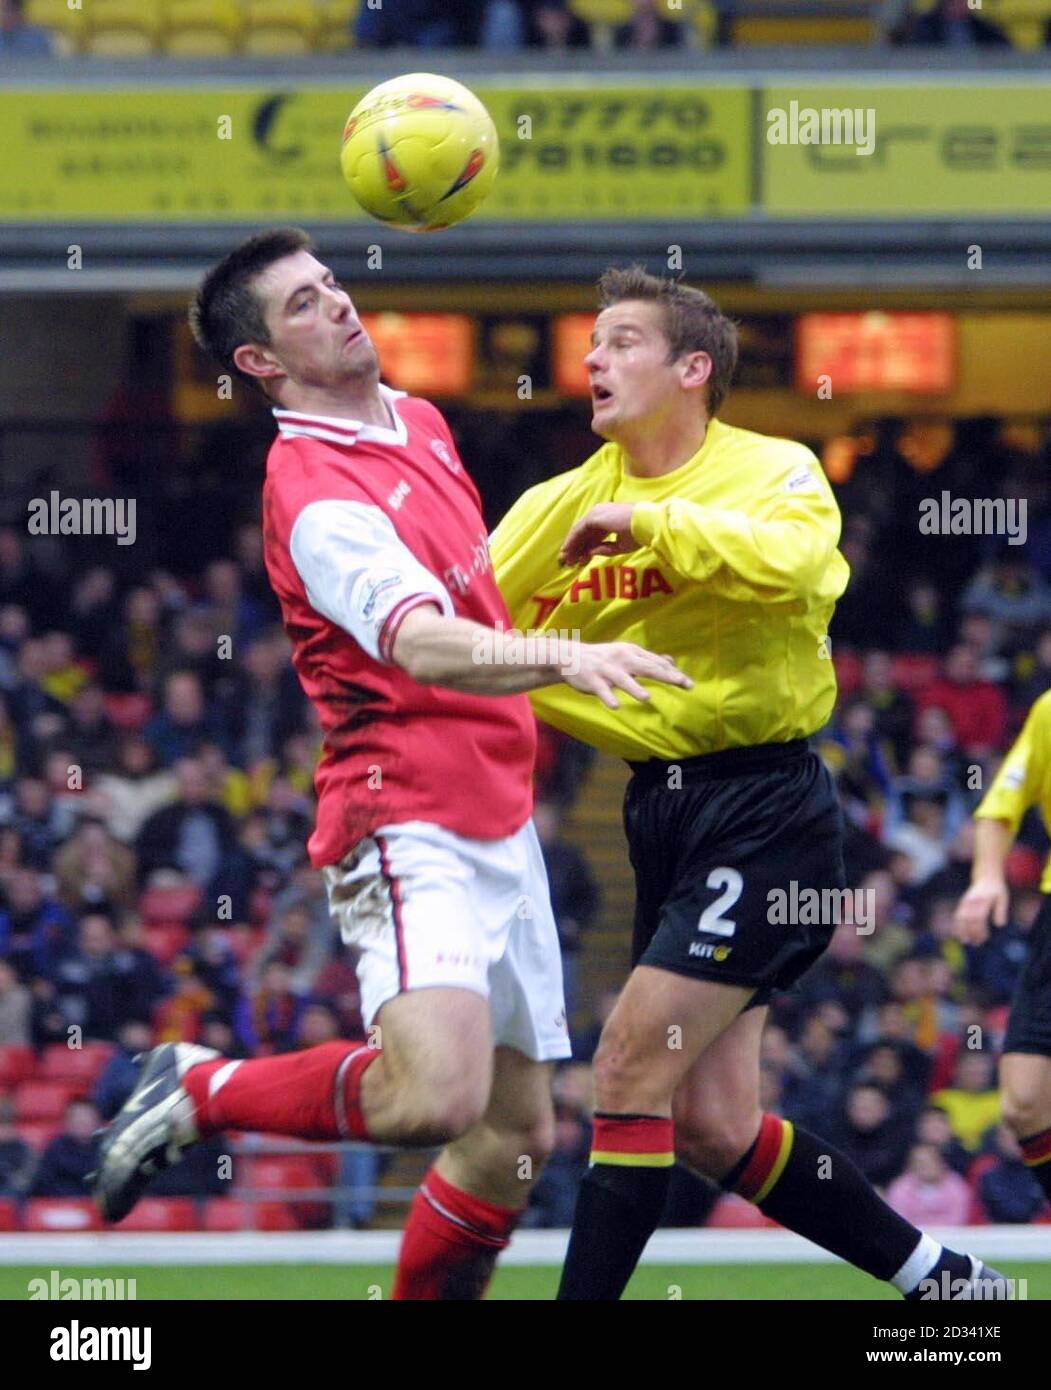 Rotherham United's Alan Lee (L) battles with Watford's Neil Ardley during their Nationwide Division One match at Watford's Vicarage Road ground. THIS PICTURE CAN ONLY BE USED WITHIN THE CONTEXT OF AN EDITORIAL FEATURE. NO UNOFFICIAL CLUB WEBSITE USE. Stock Photo